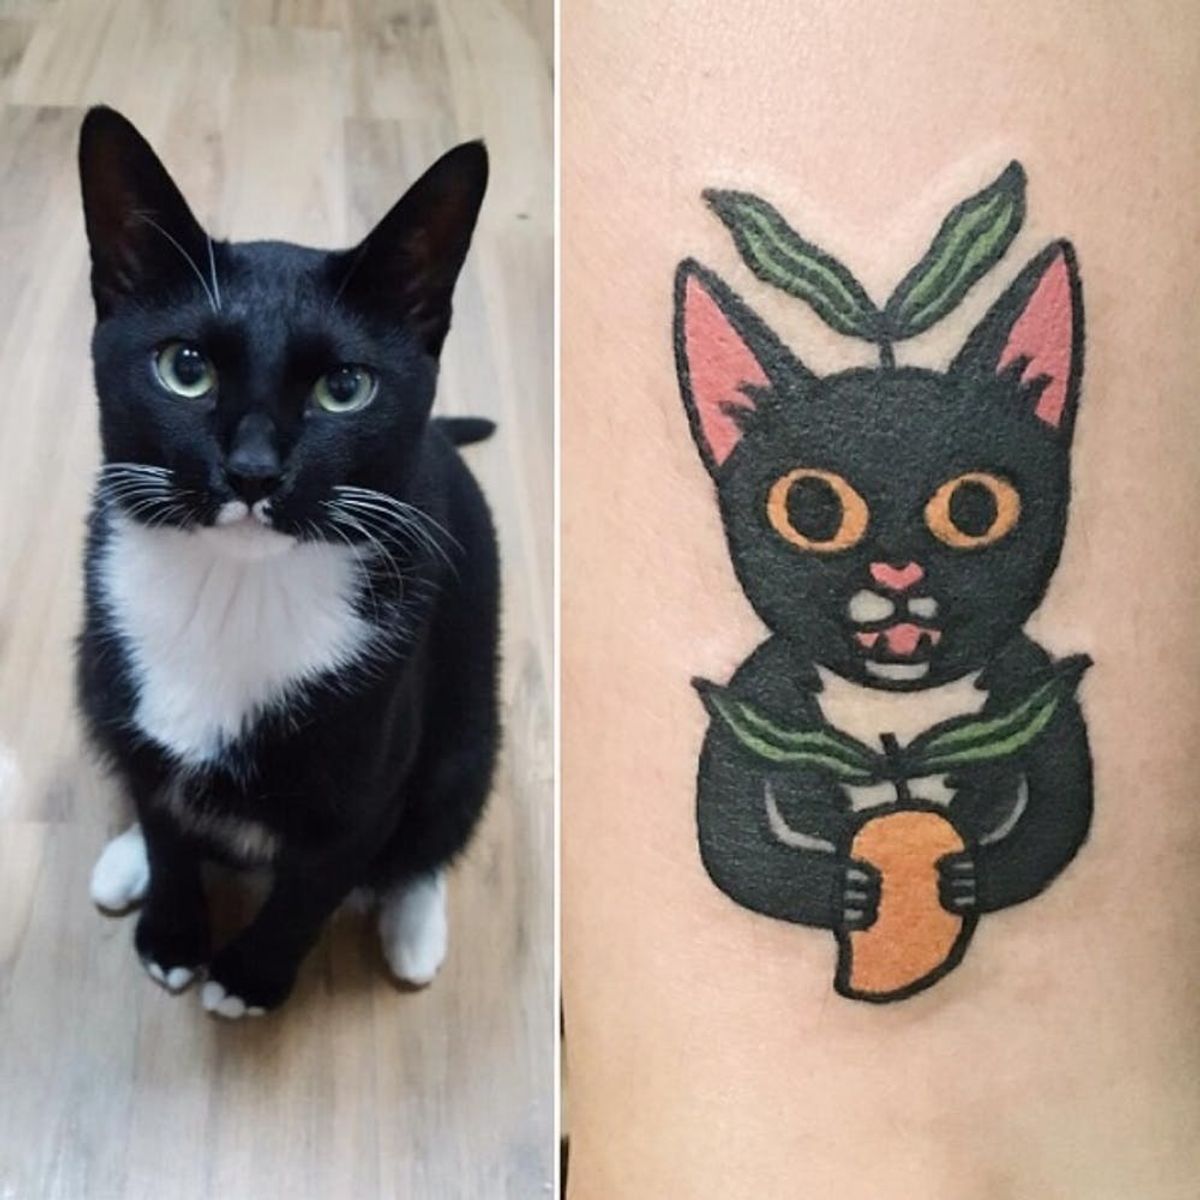 This Artist Will Turn Your Pets into the Cutest Tattoos EVER